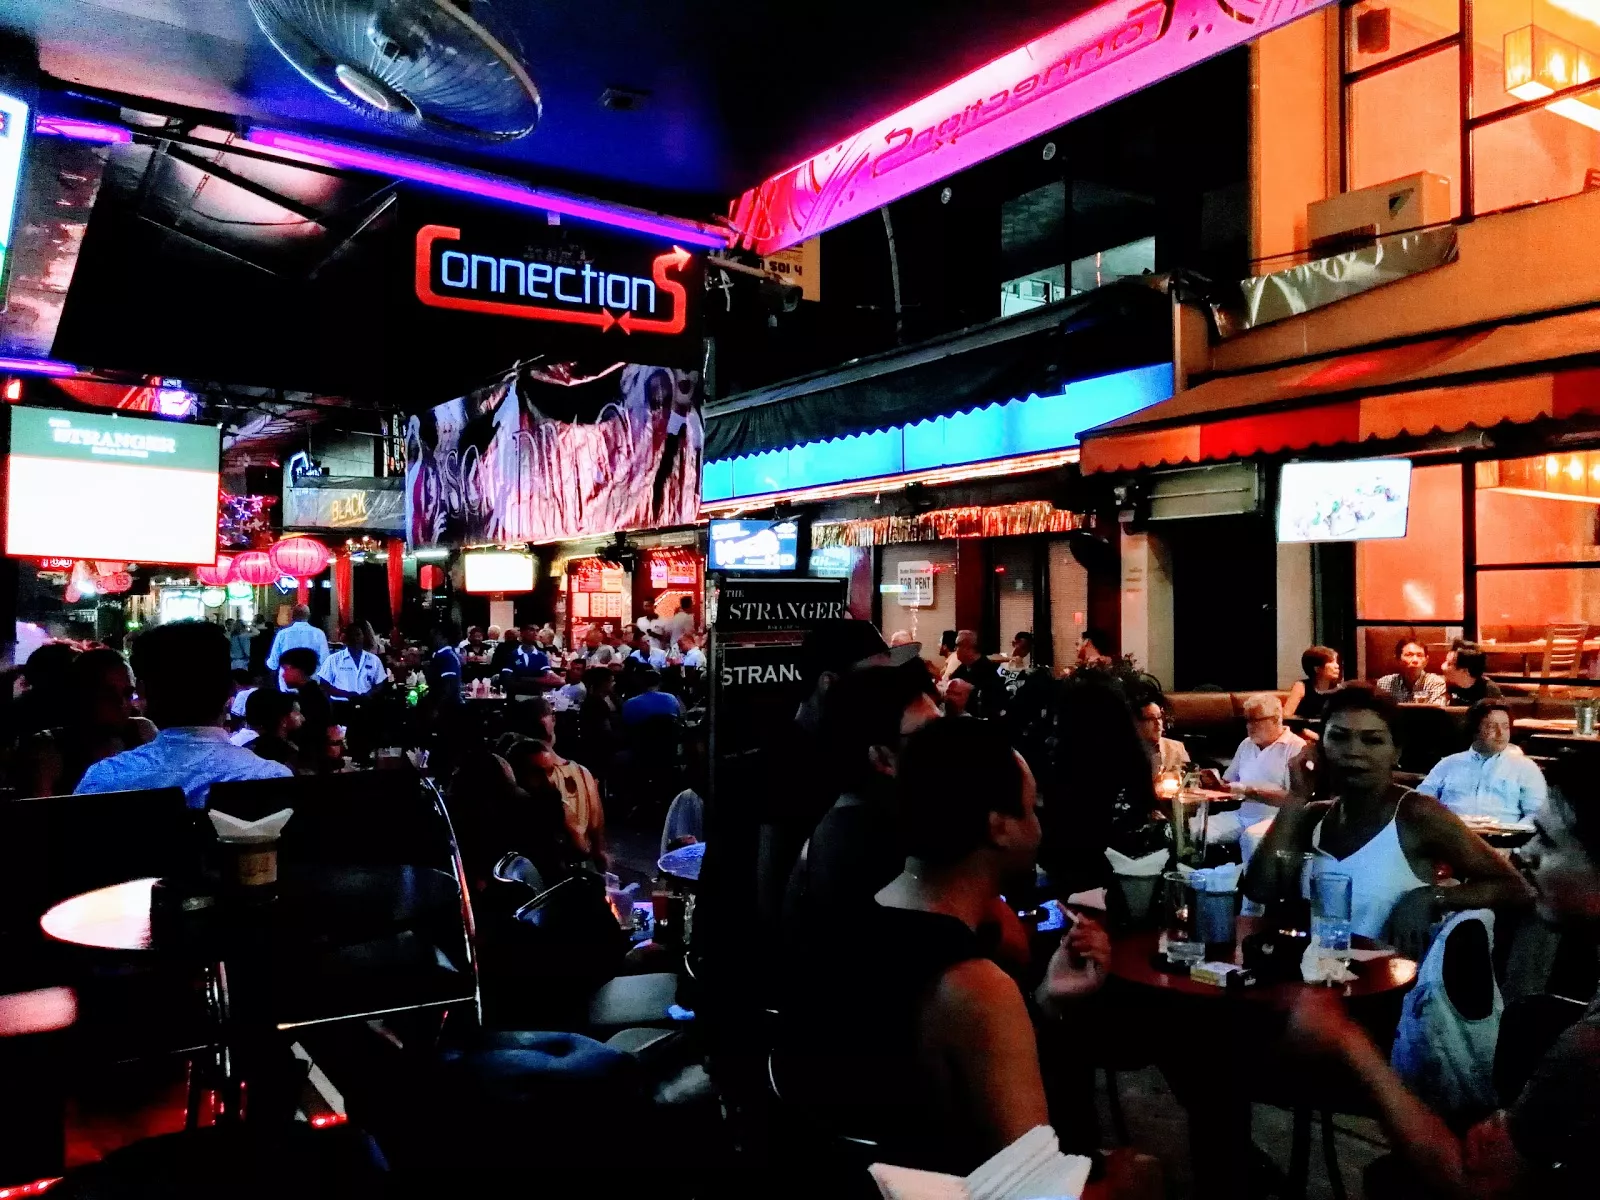 Connections Bar Bangkok in Thailand, Central Asia | LGBT-Friendly Places,Bars - Rated 0.8